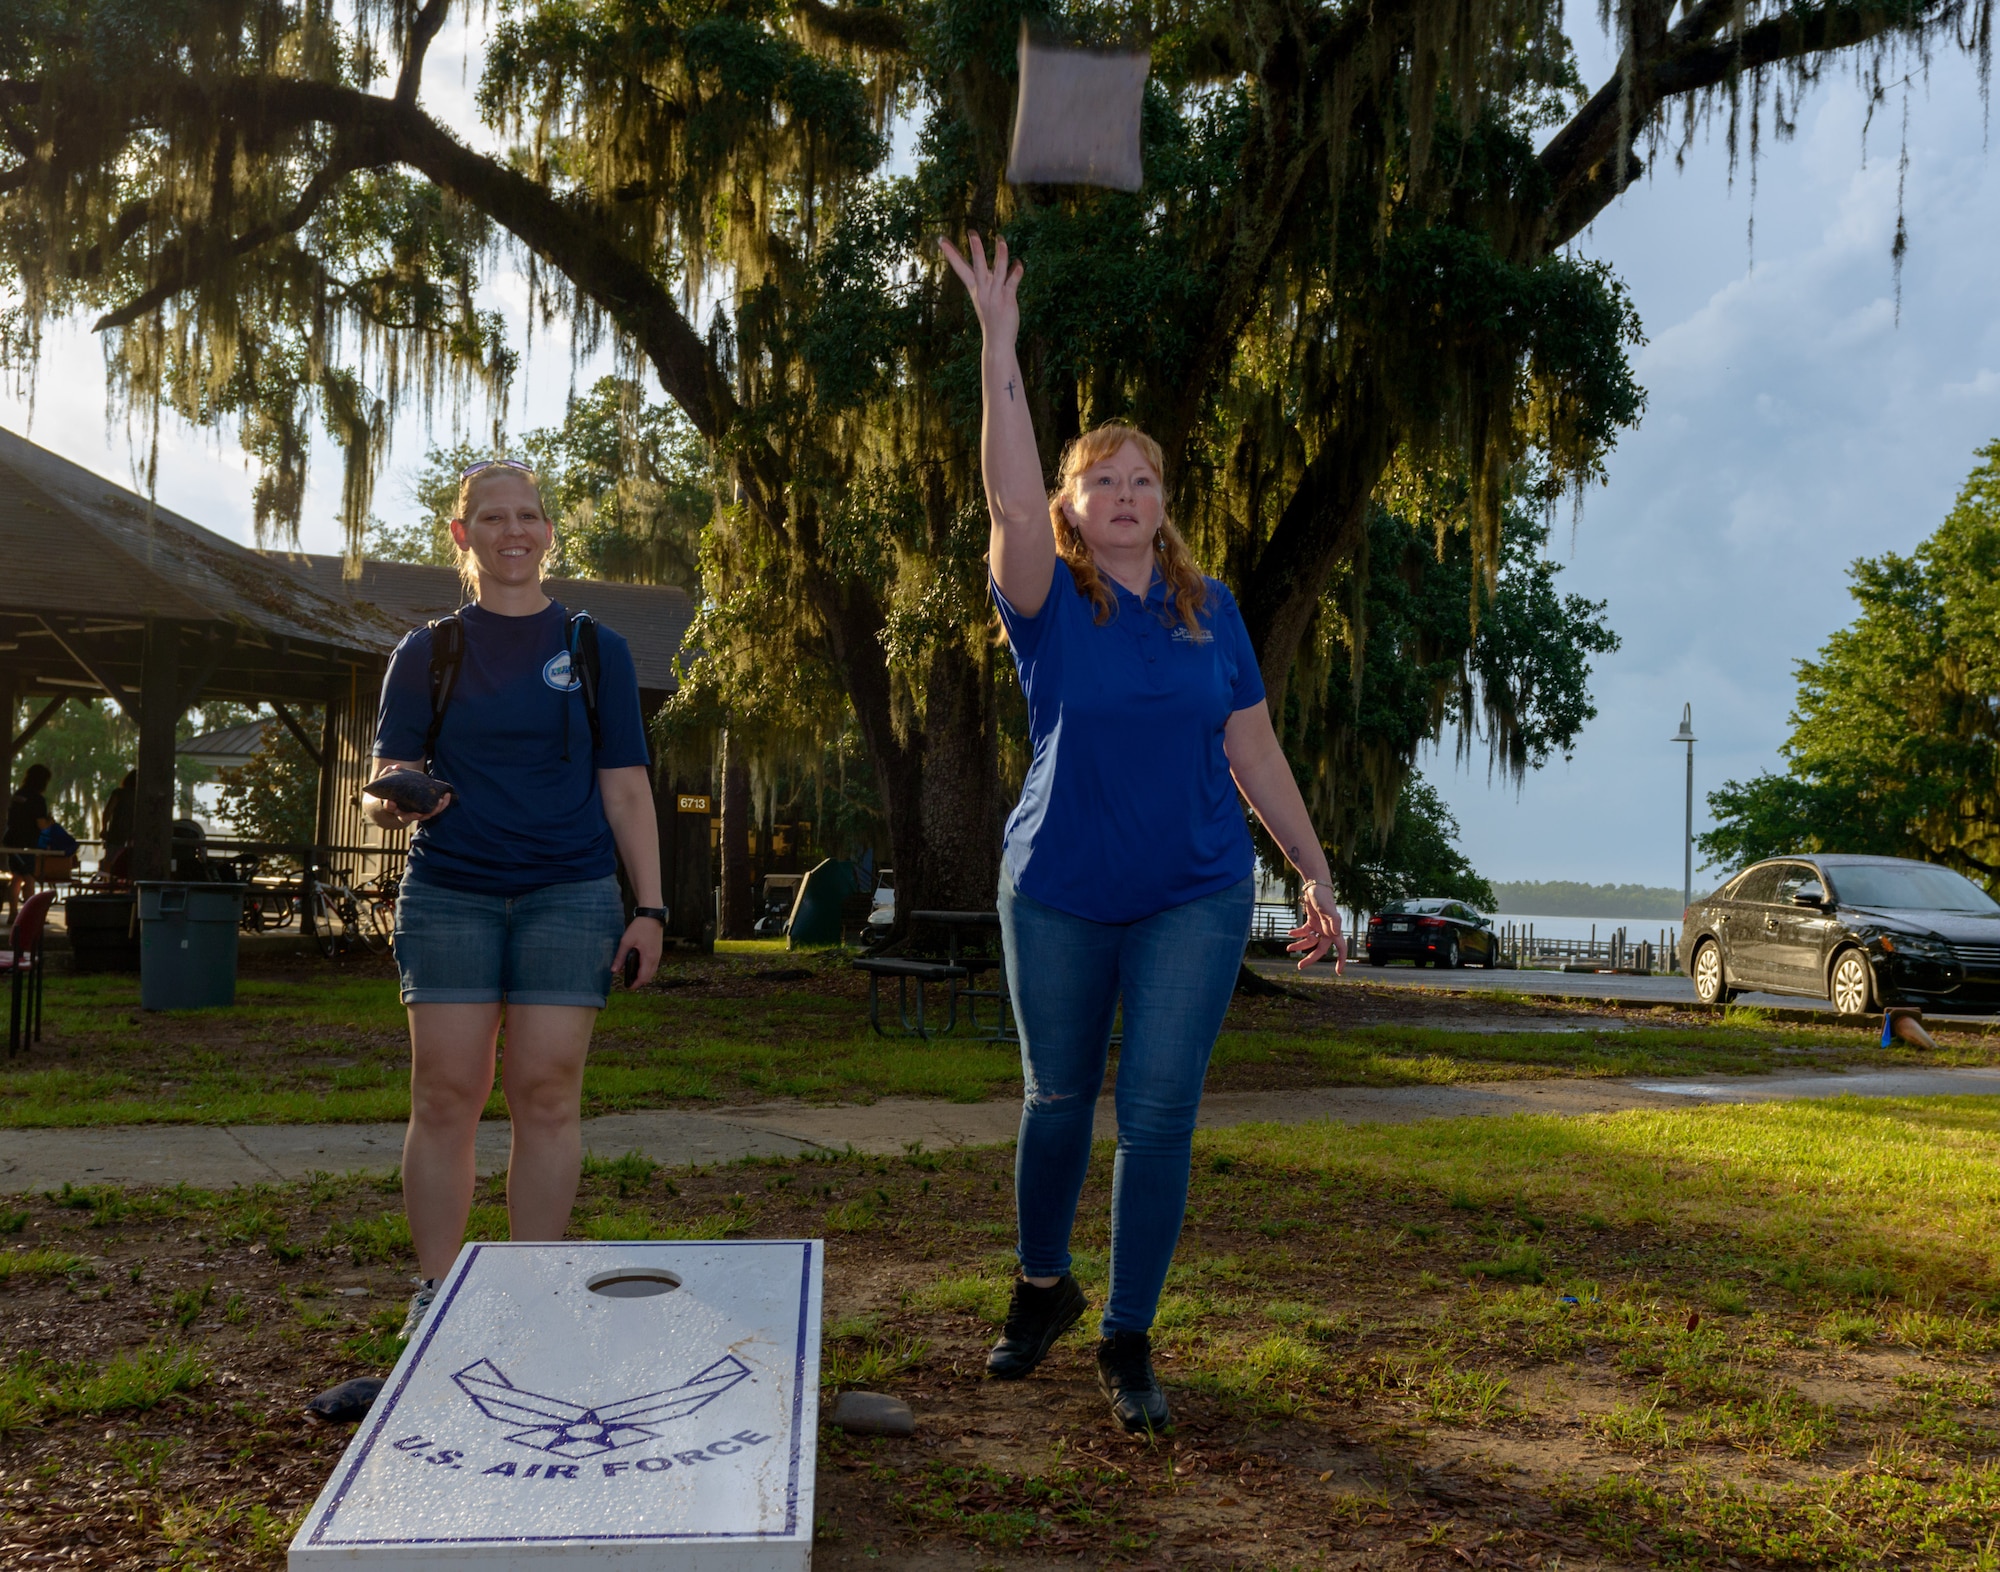 U.S. Air Force Maj. Erin Holland, 81st Force Support Squadron operations officer, and Master Sgt. Krista Mercadel, 81st FSS force management superintendent, play corn hole during Freedom Fest at Marina Park on Keesler Air Force Base, Mississippi, June 30, 2018. The event included carnival rides, a burger cook-off, hot wings and watermelon eating competitions and a fireworks display. (U.S. Air Force photo by Andre’ Askew)